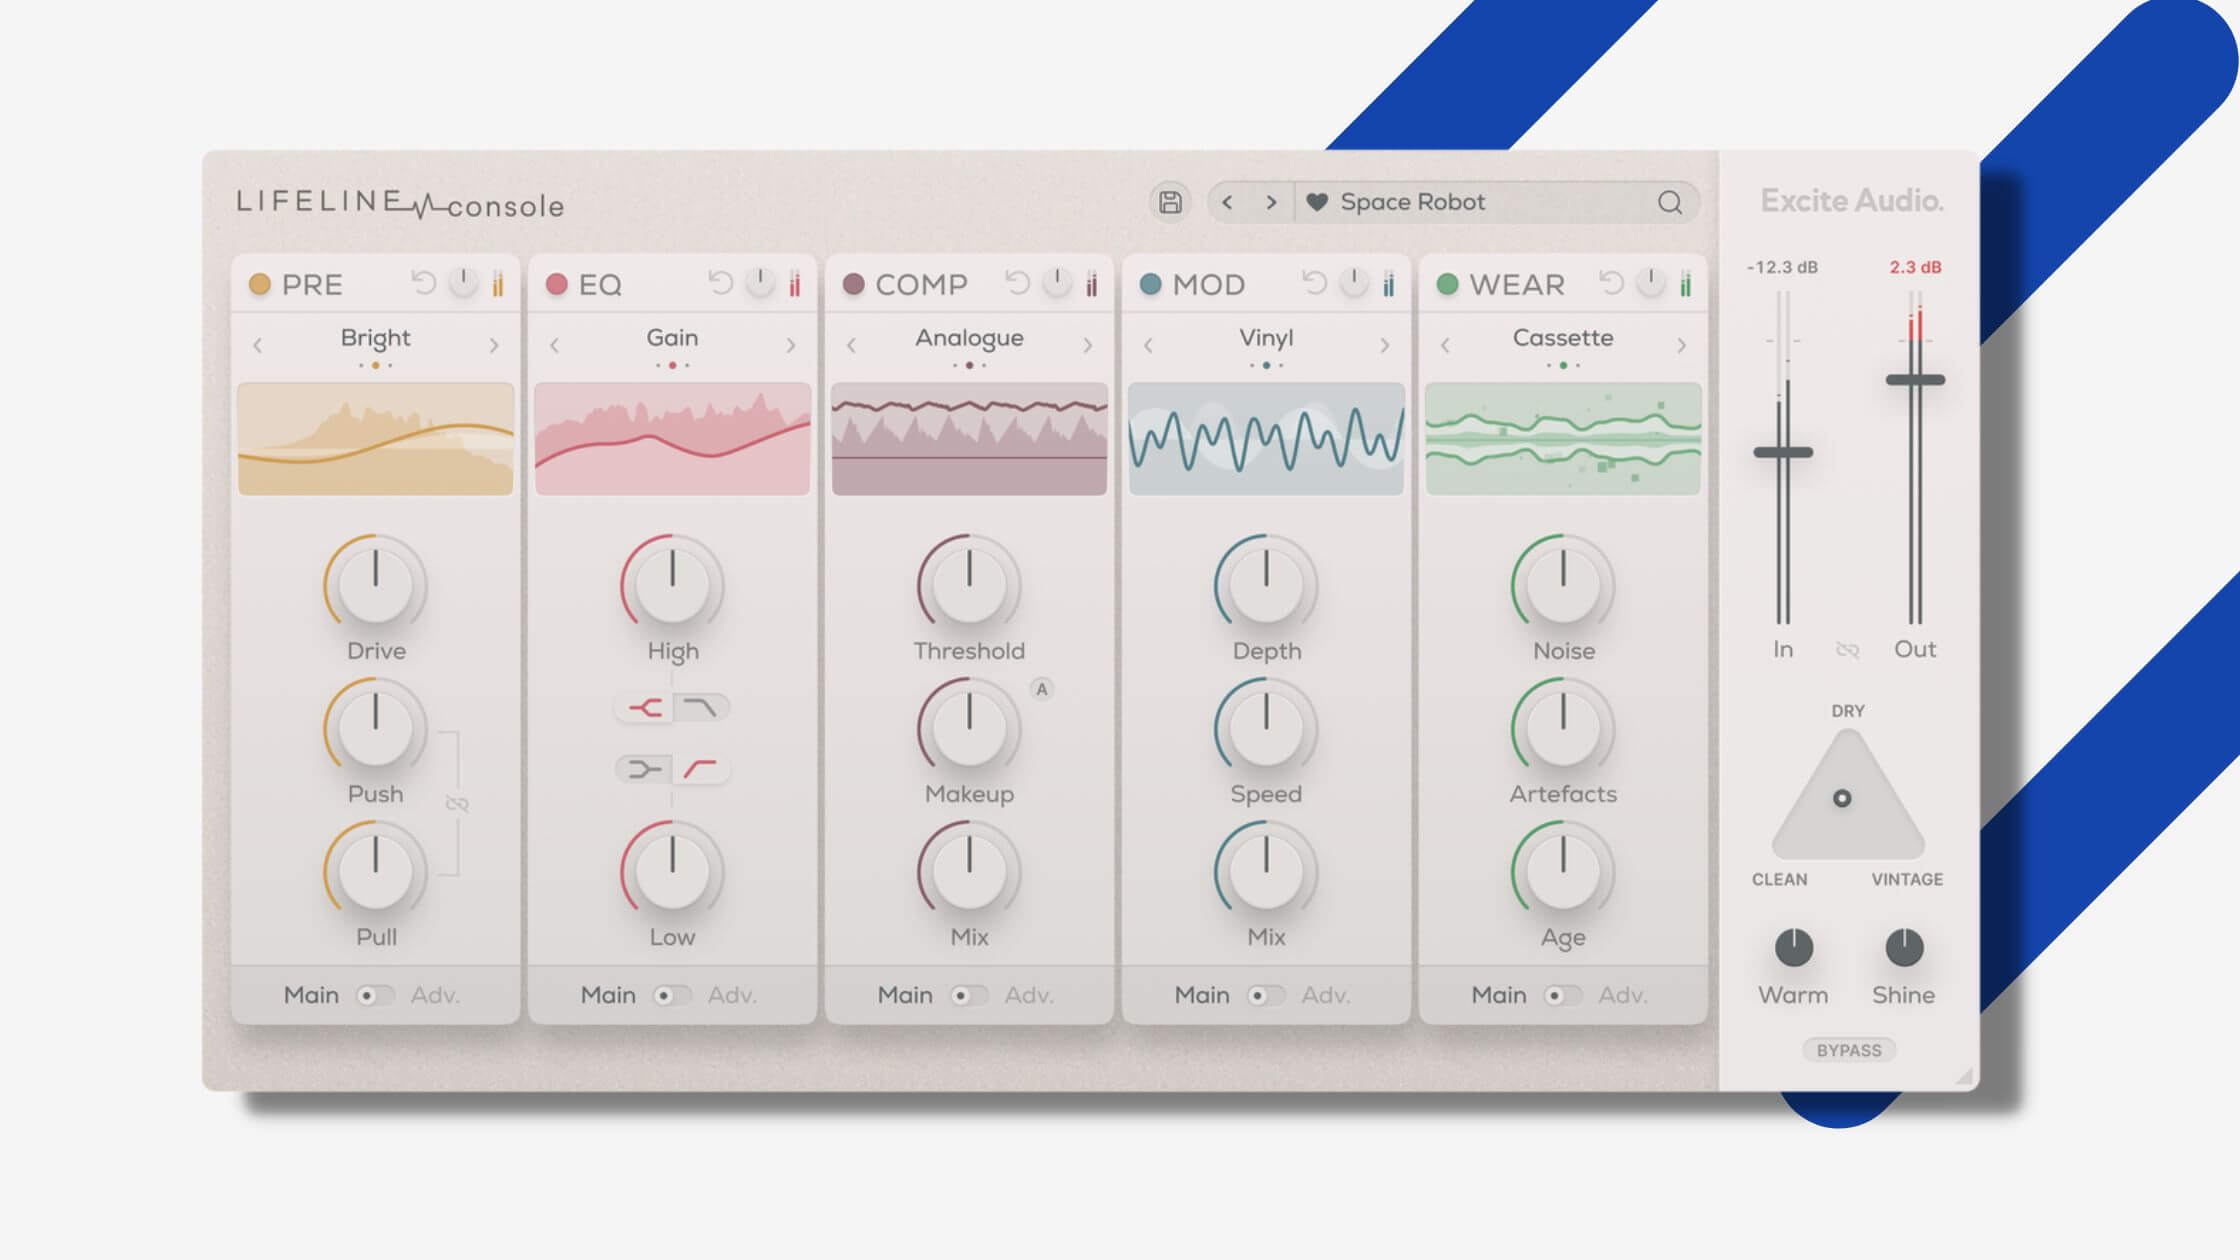 Get Excite Audio’s Lifeline Console Lite for free before time runs out!